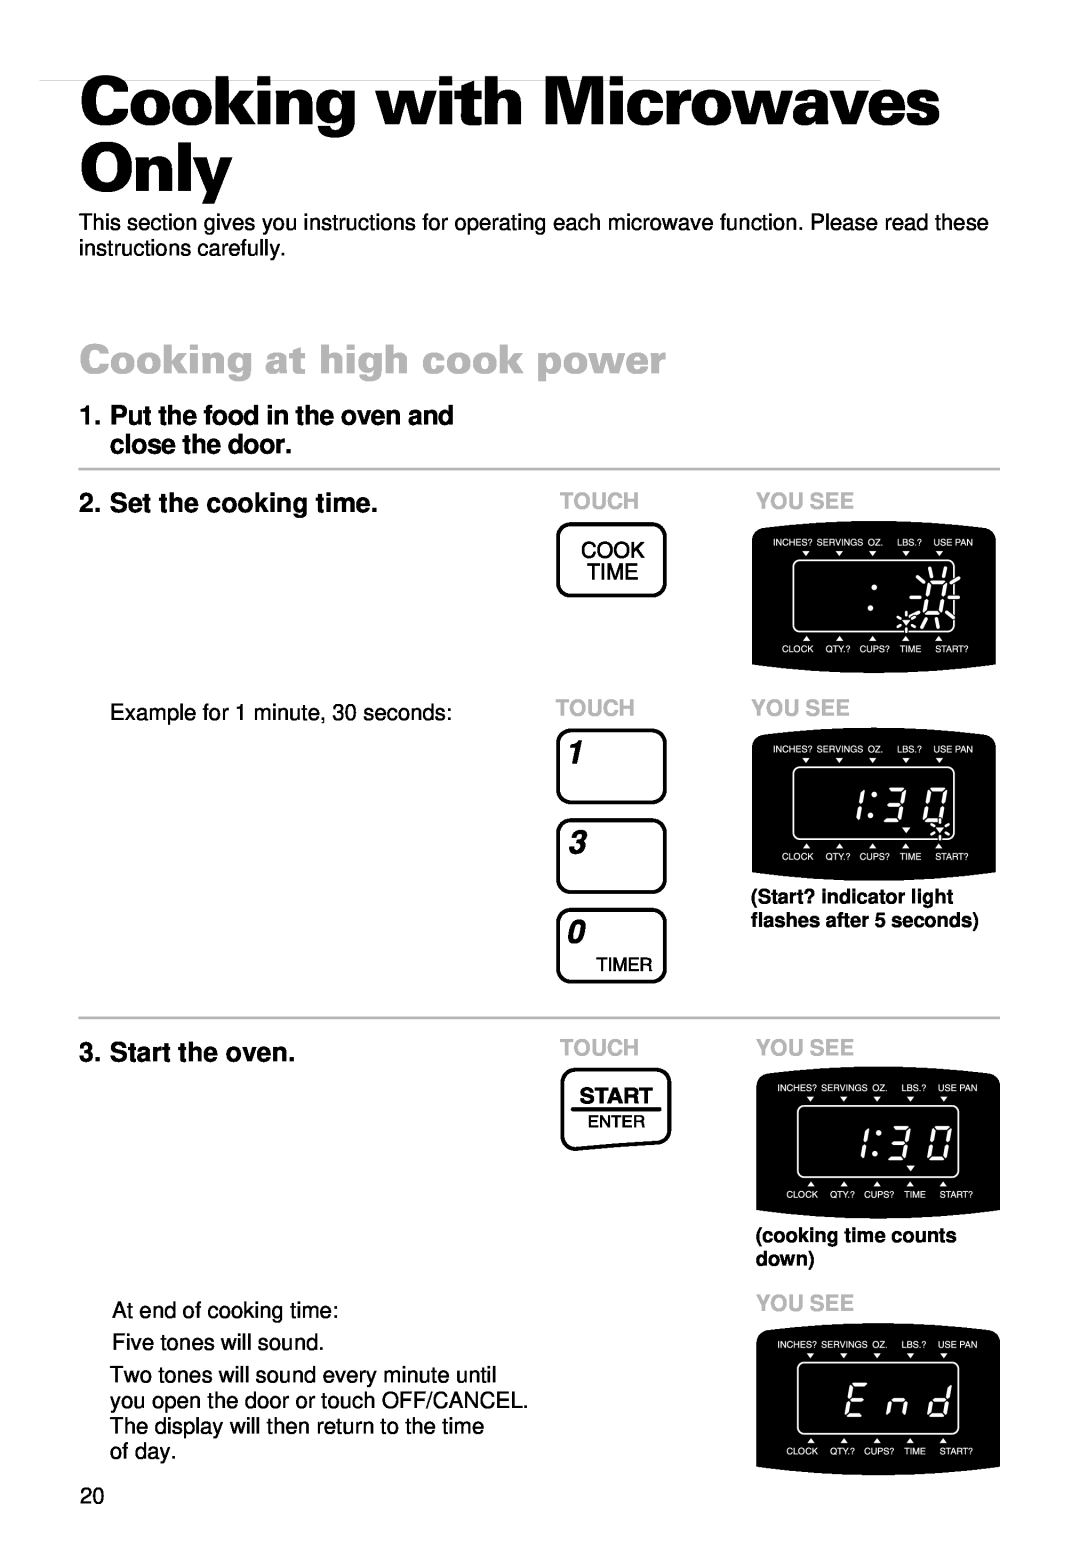 Whirlpool YMT9092SF Cooking with Microwaves Only, Cooking at high cook power, Put the food in the oven and close the door 